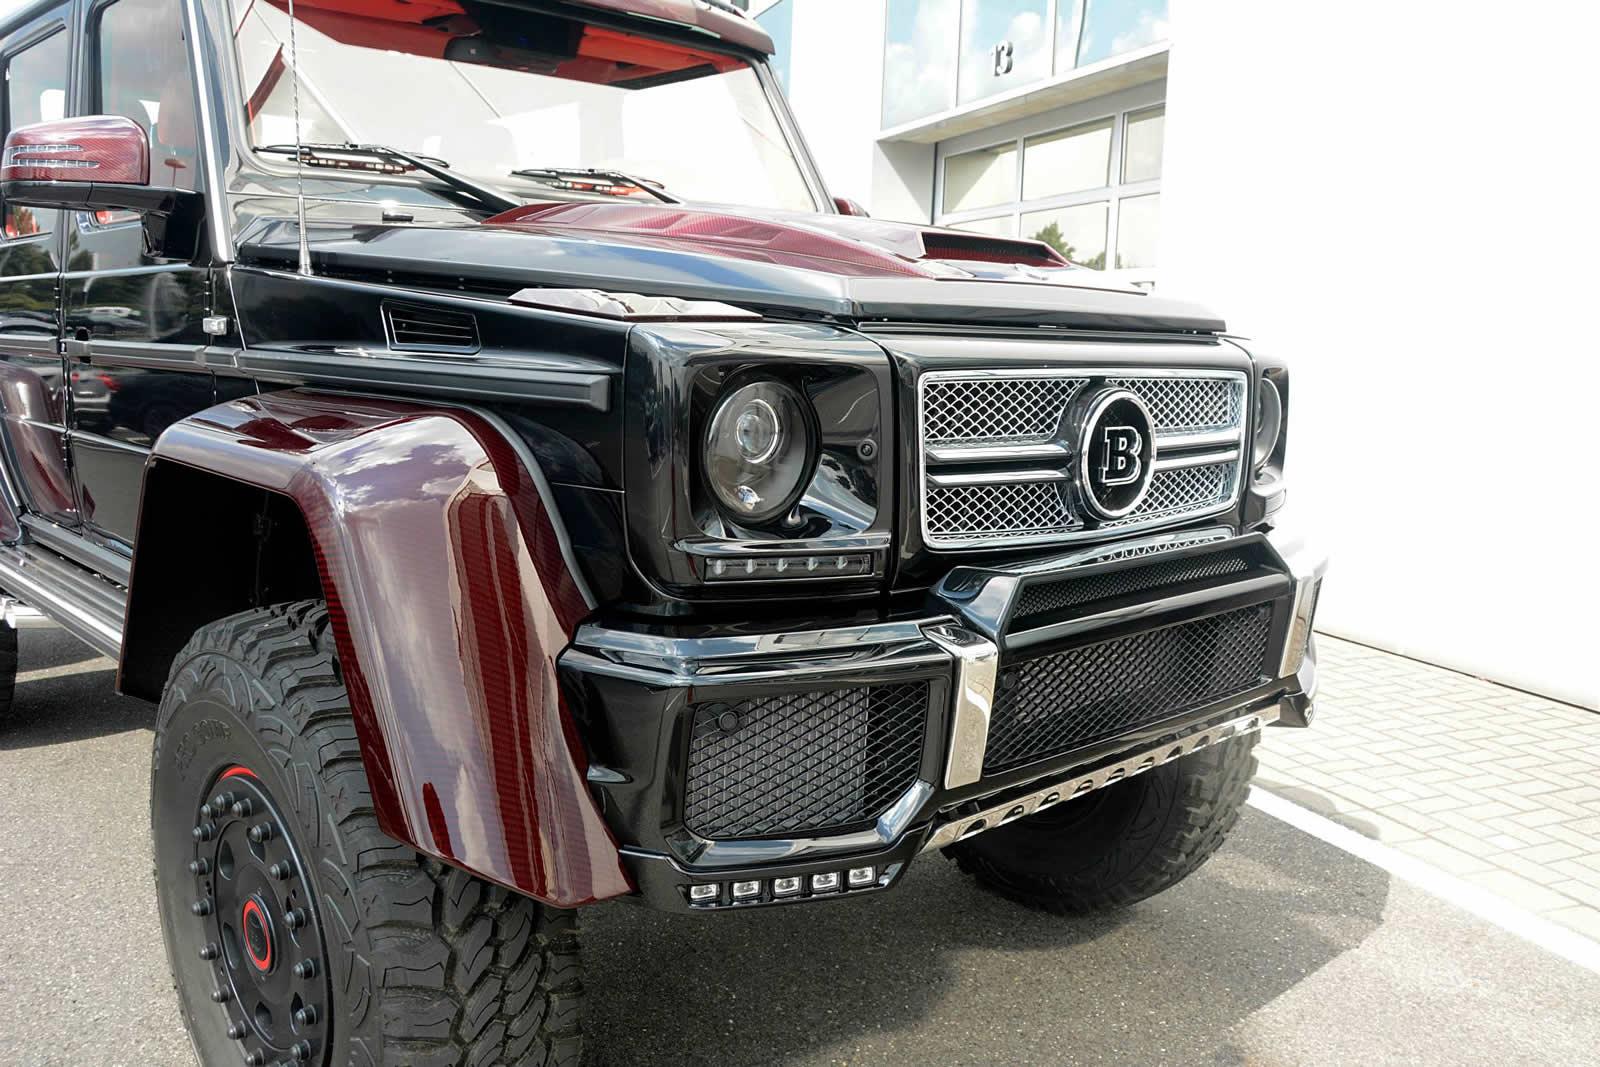 brabus-mercedes-benz-g63-amg-6x6-now-sports-red-carbon-fiber-goes-to-the-middle-east-photo-gallery_7